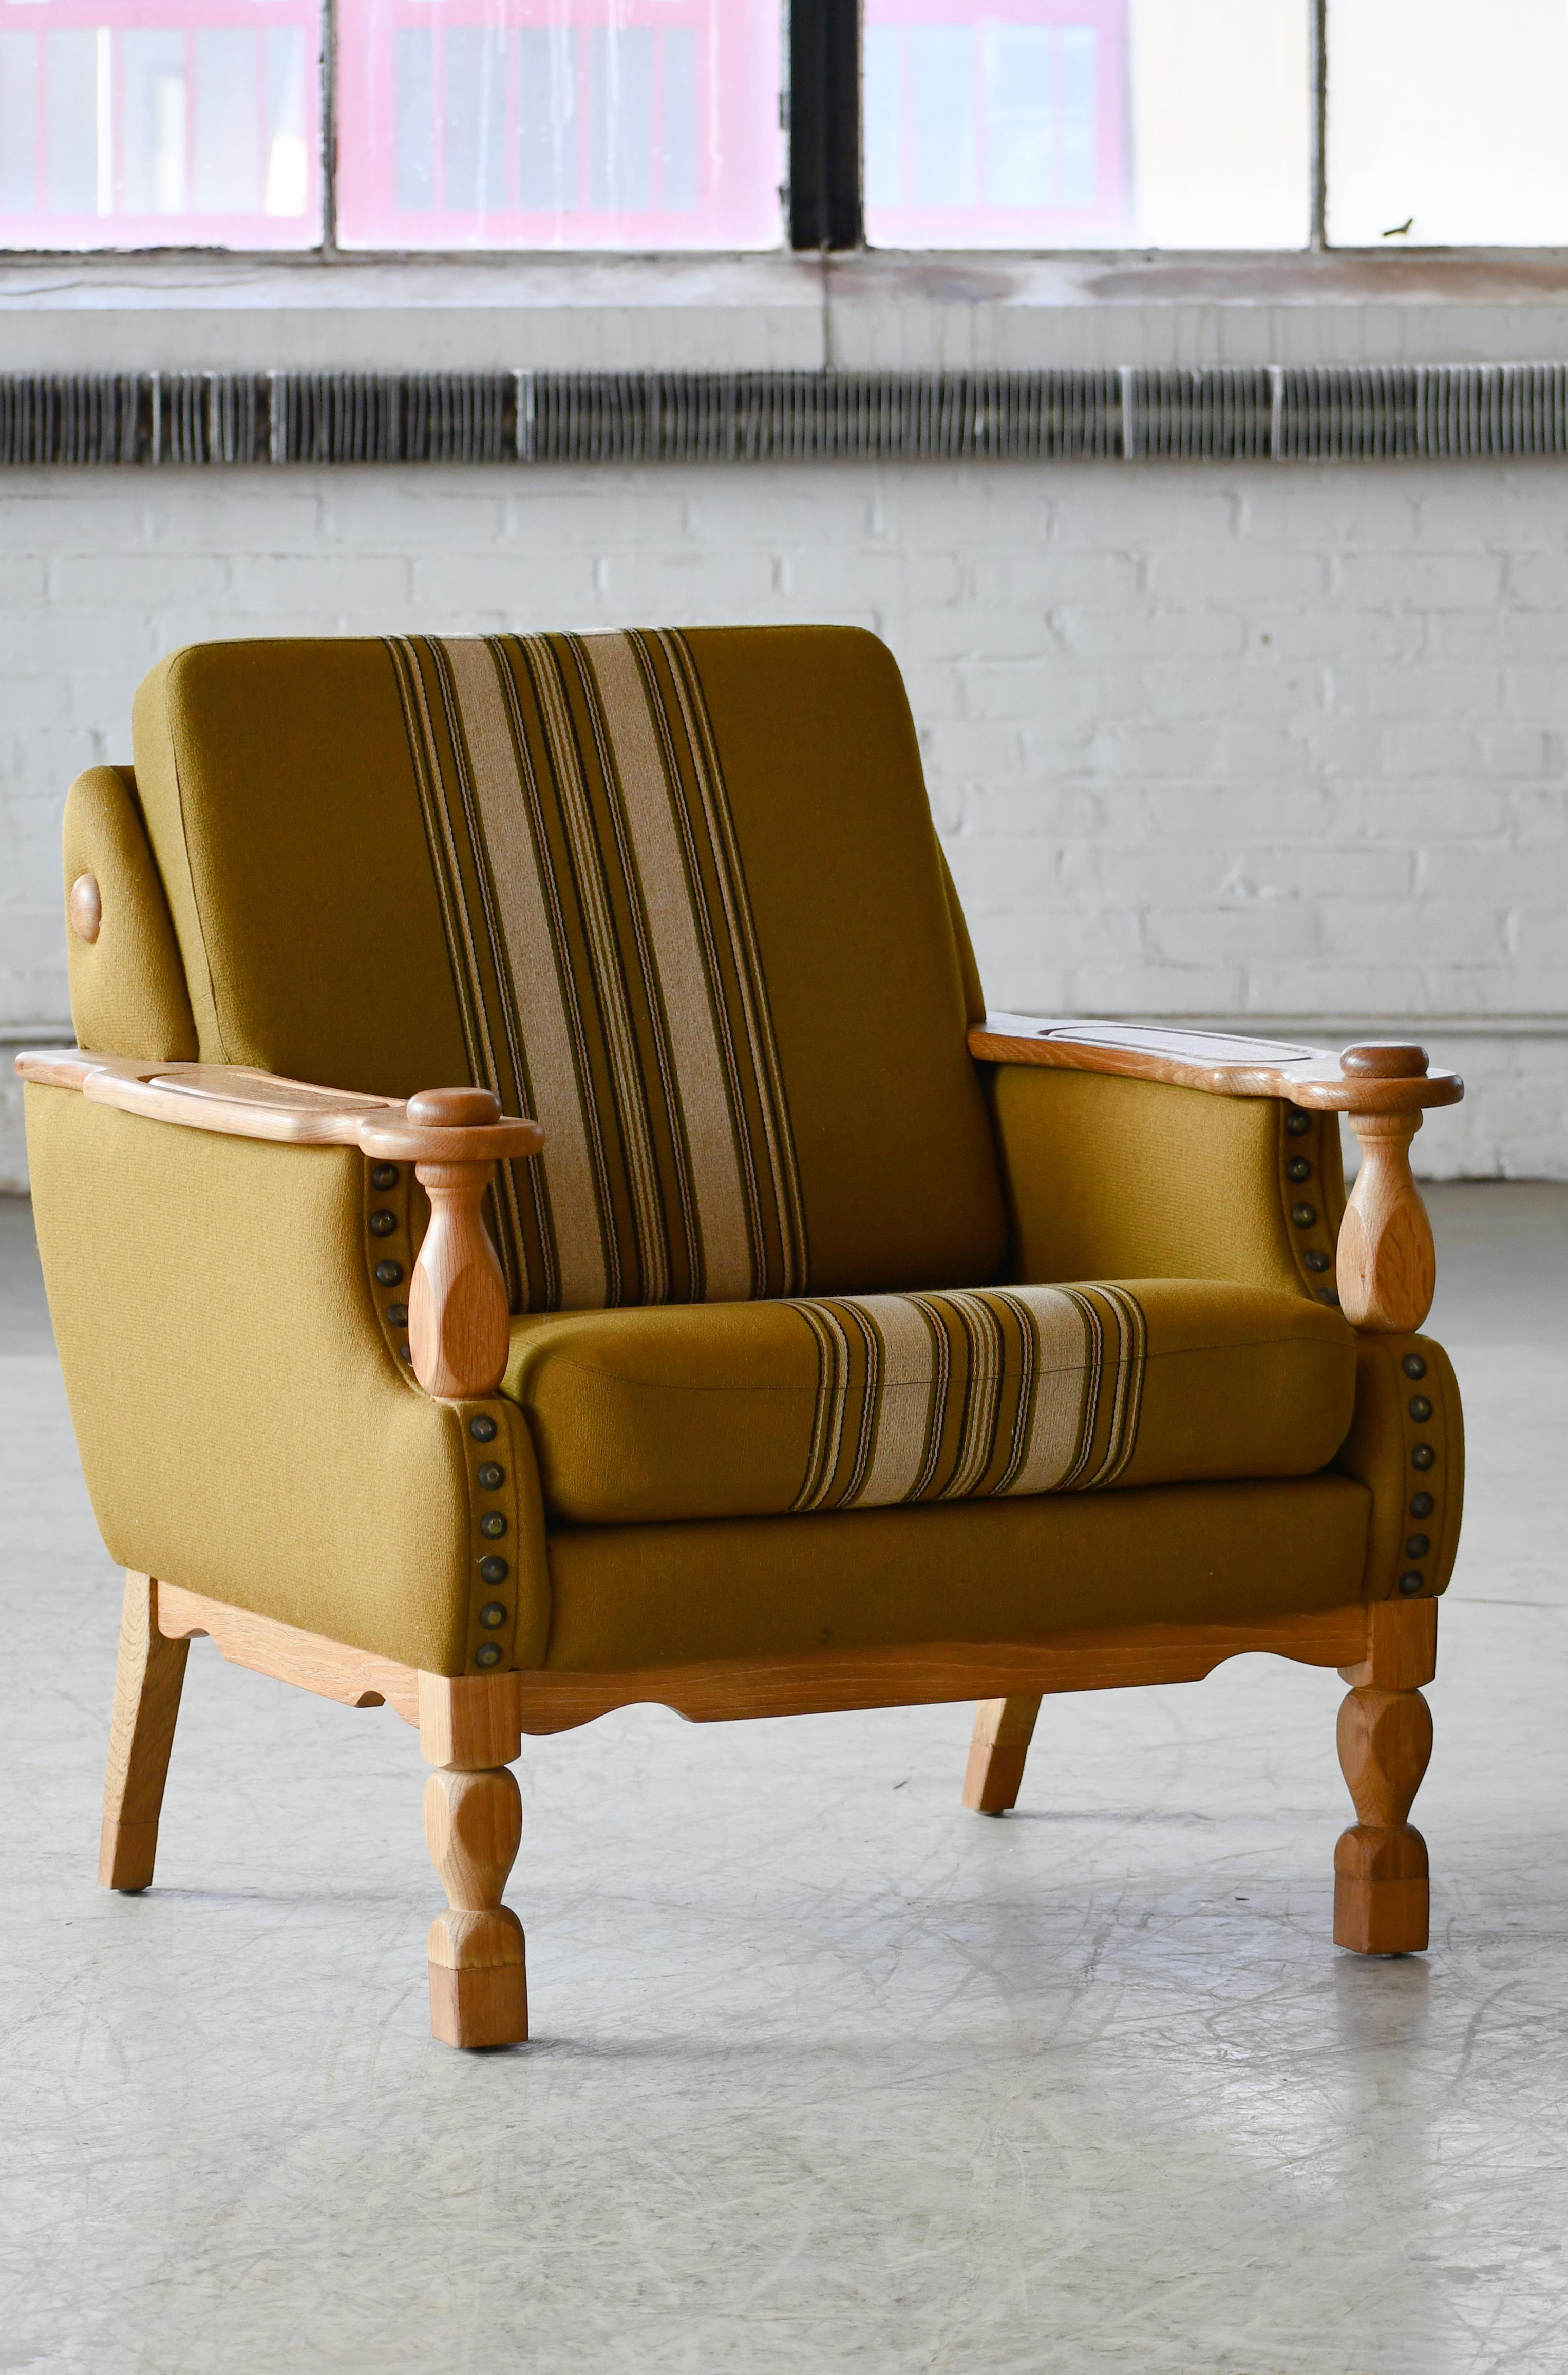 Rare and sought after lounge chair by Danish Designer, Henning Kjaernulf made from quarter-sawn white oak and hand carved in brutalist style seeking inspiration from art & crafts and even Jacobean styles. Kjaernulf's style is very unique and